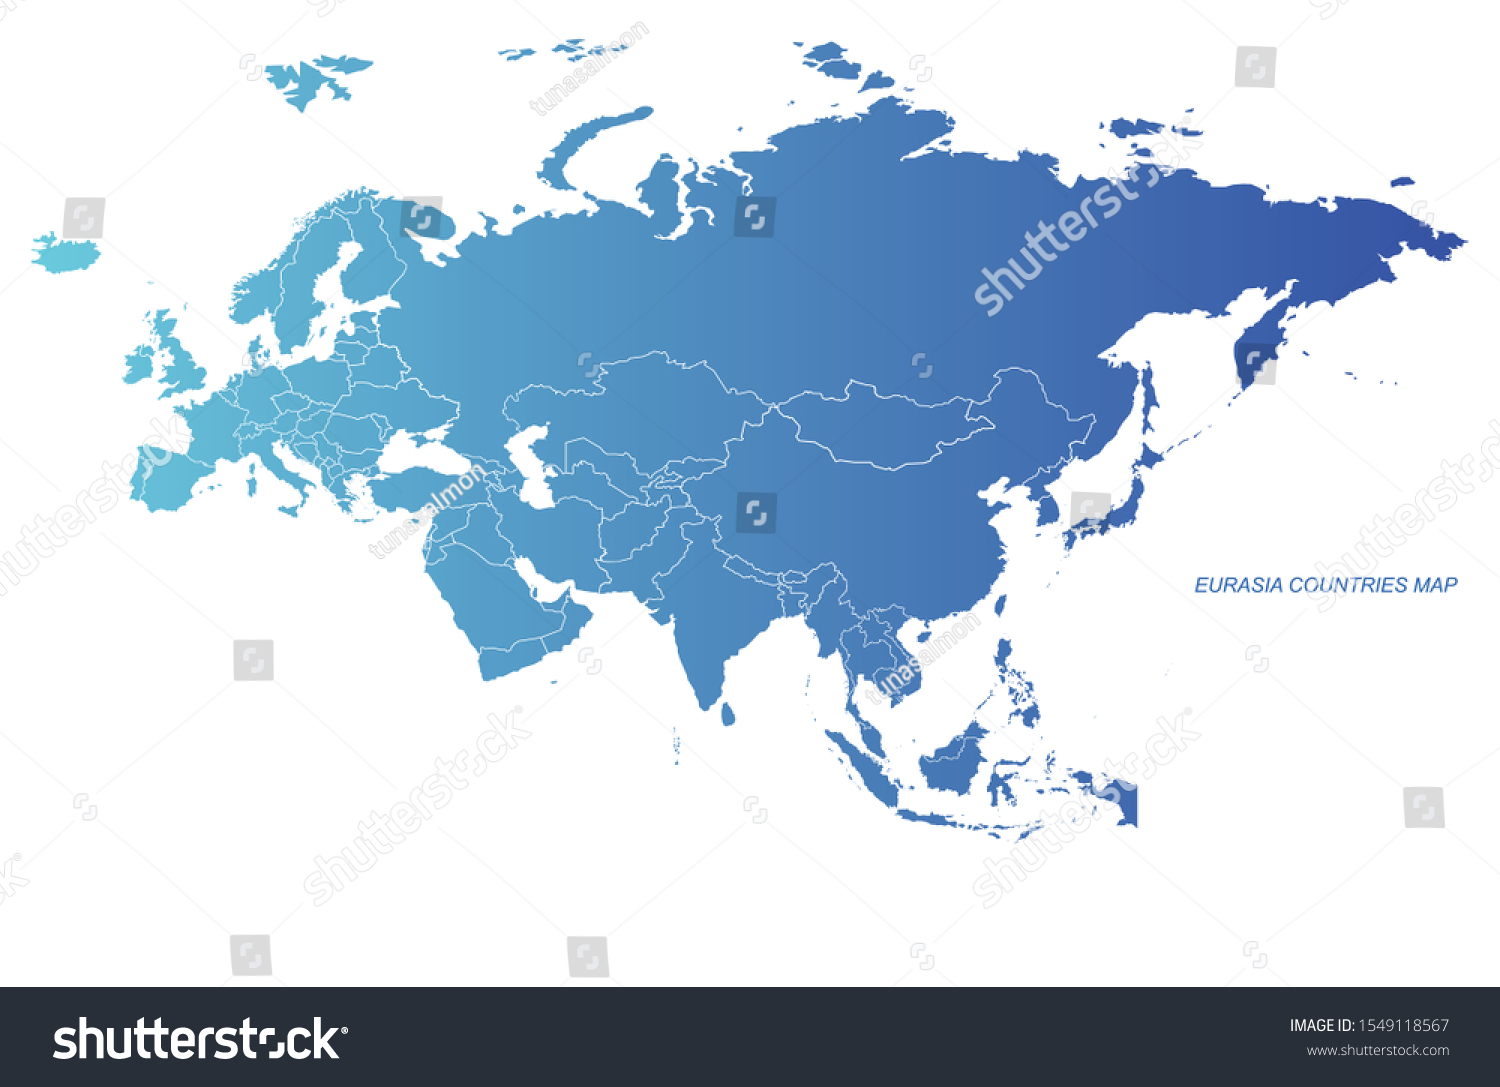 graphic vector of eurasia map. eurasia countries detailed map. europe, asia country map. #1549118567